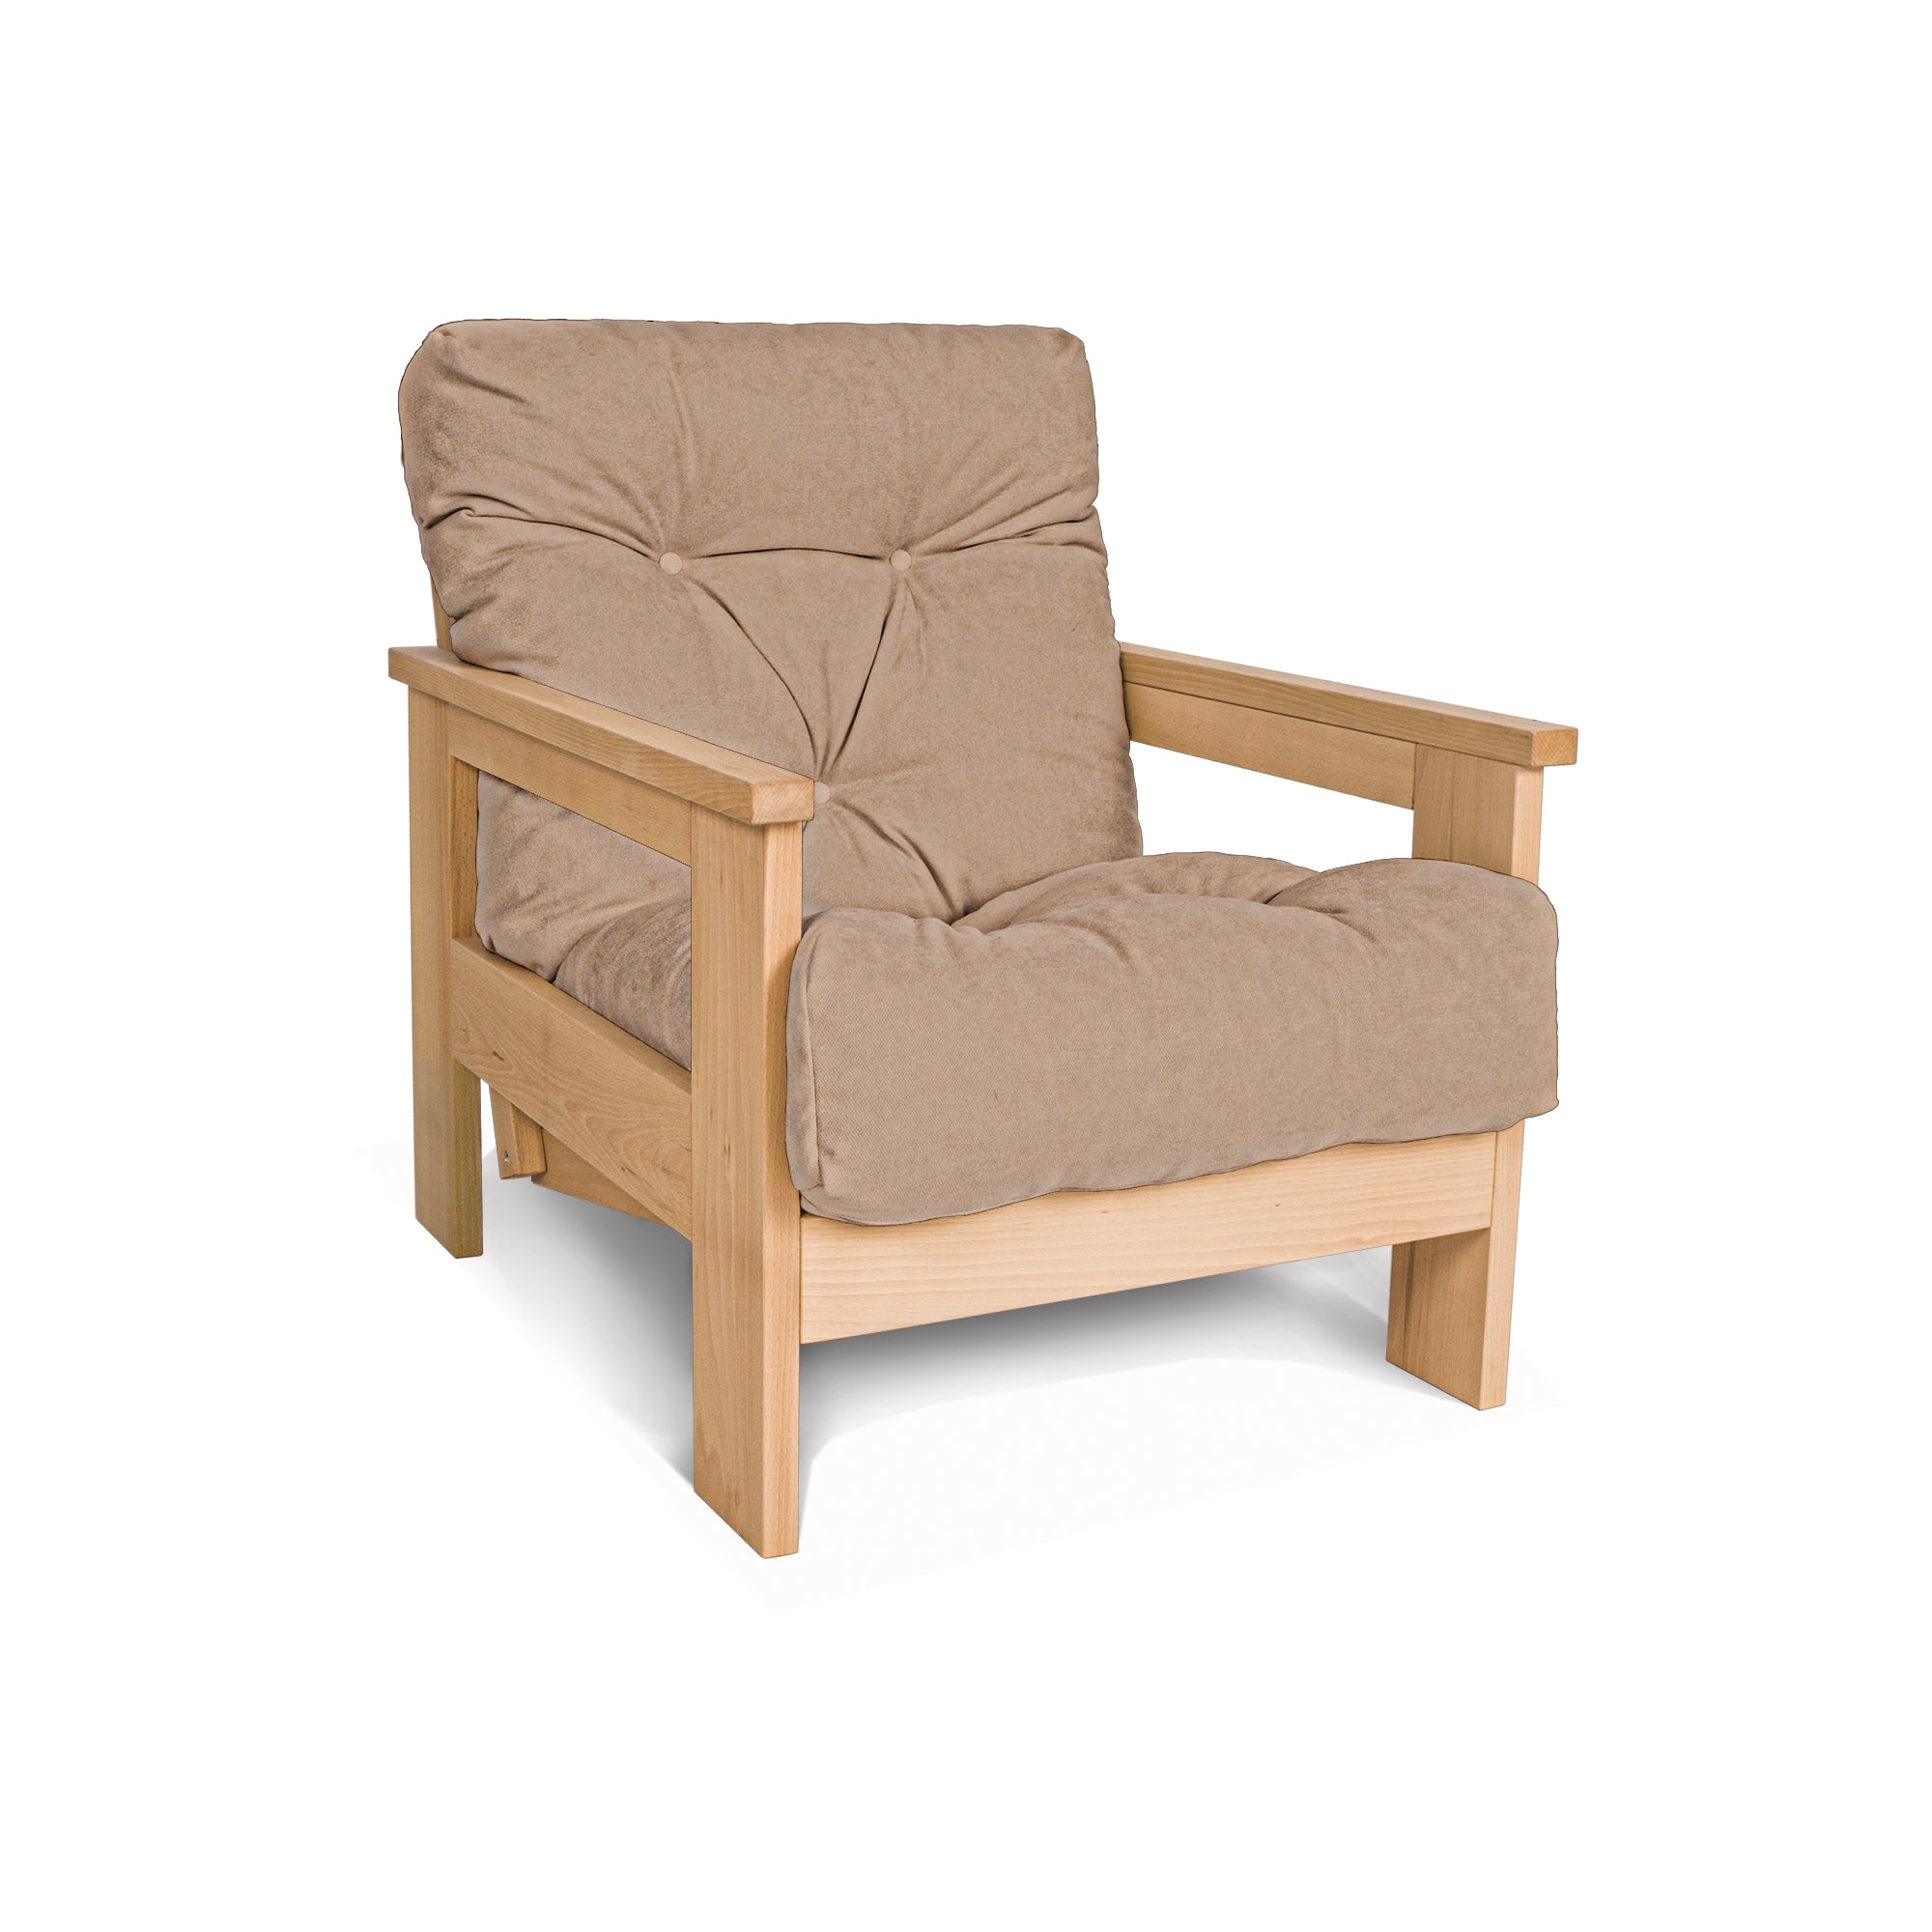 MEXICO Armchair, Beech Wood Frame, Natural Colour-beige fabric